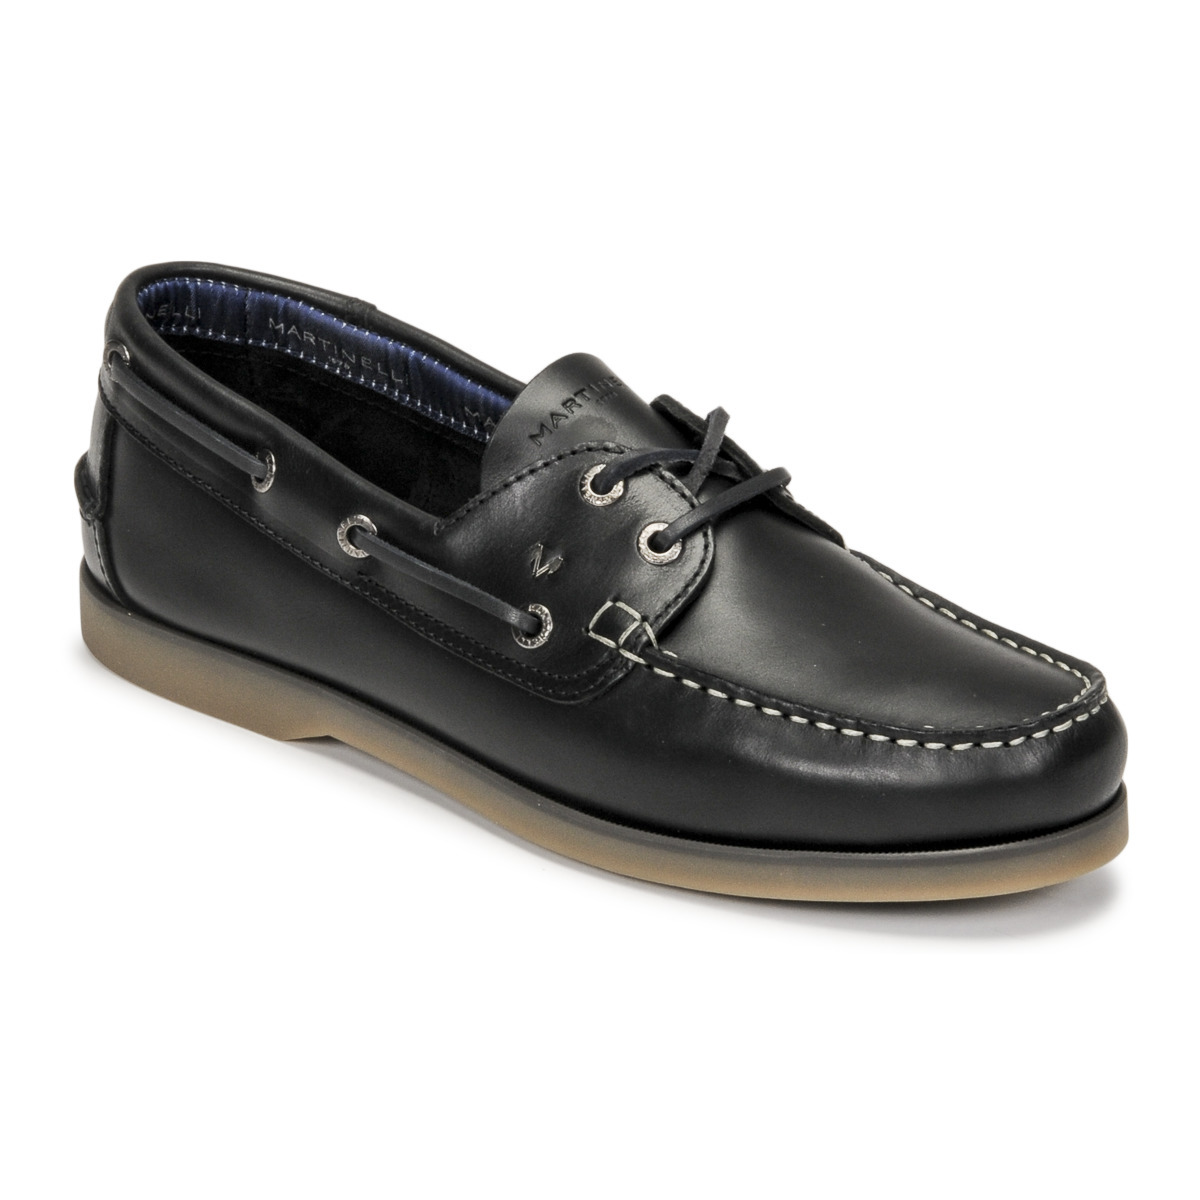 Martinelli Gent Boat Shoes Black at Spartoo GOOFASH